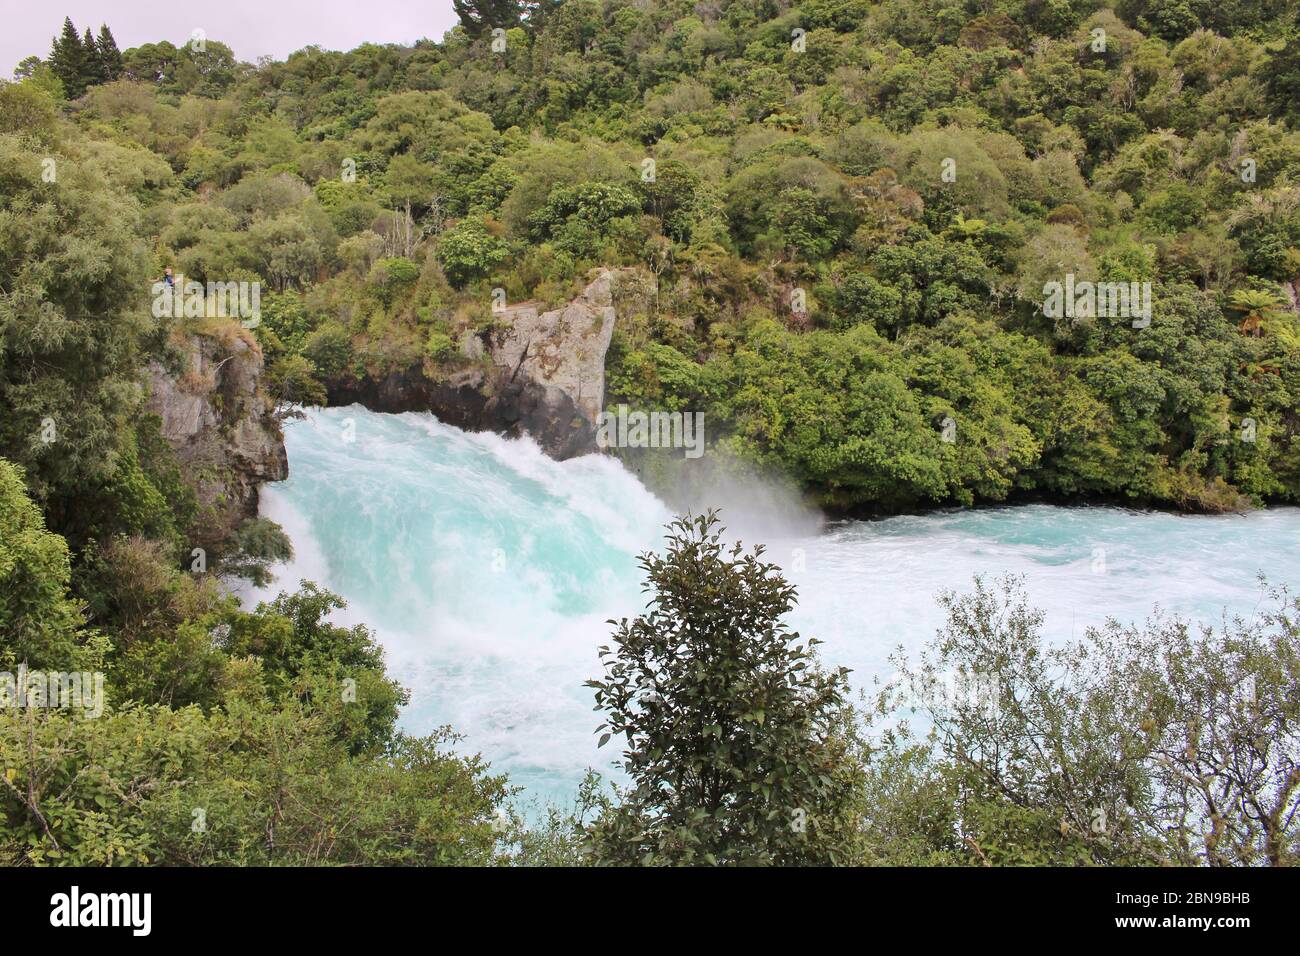 Stunning Huka Falls of Waikato River in Taupo District in Waikato Region on the North Island in New Zealand. The massive, powerfull waterfall is surro Stock Photo